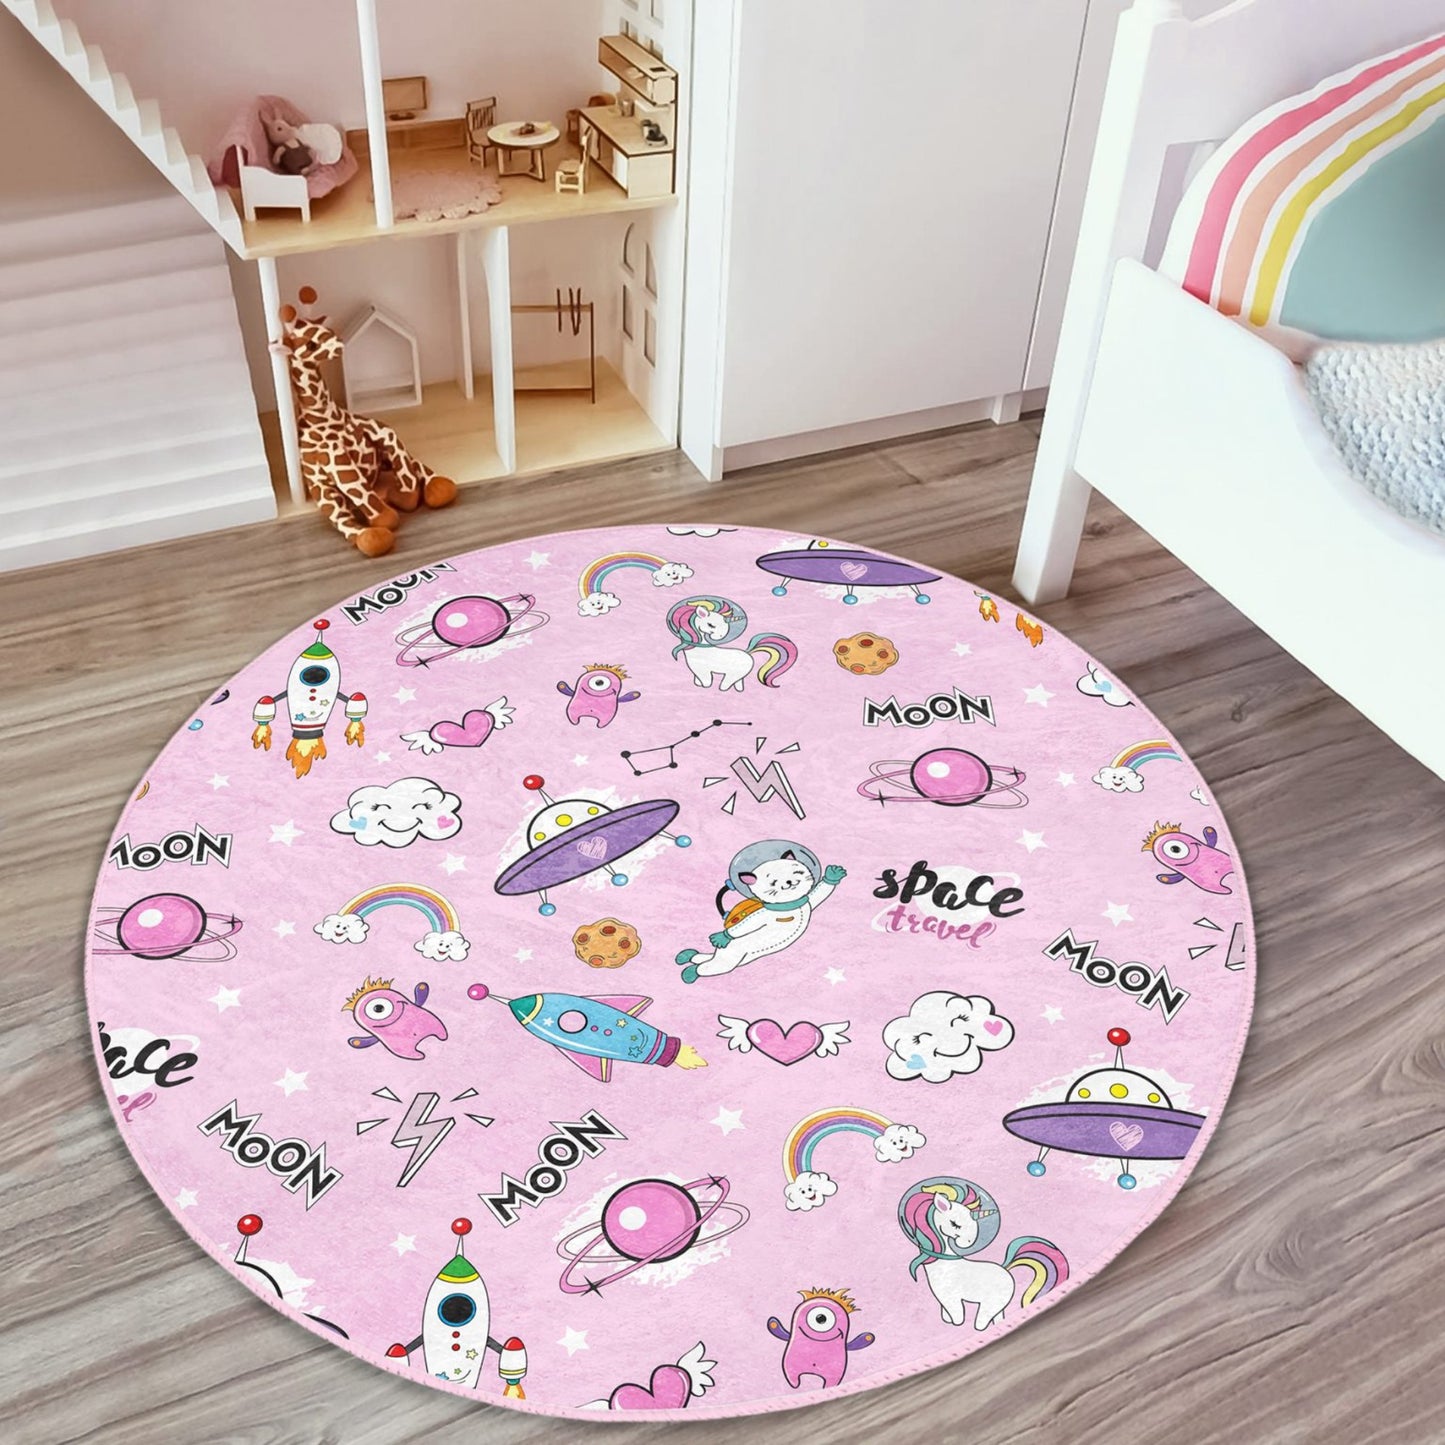 Rug with Cosmic Adventure Theme for Kids' Play Area